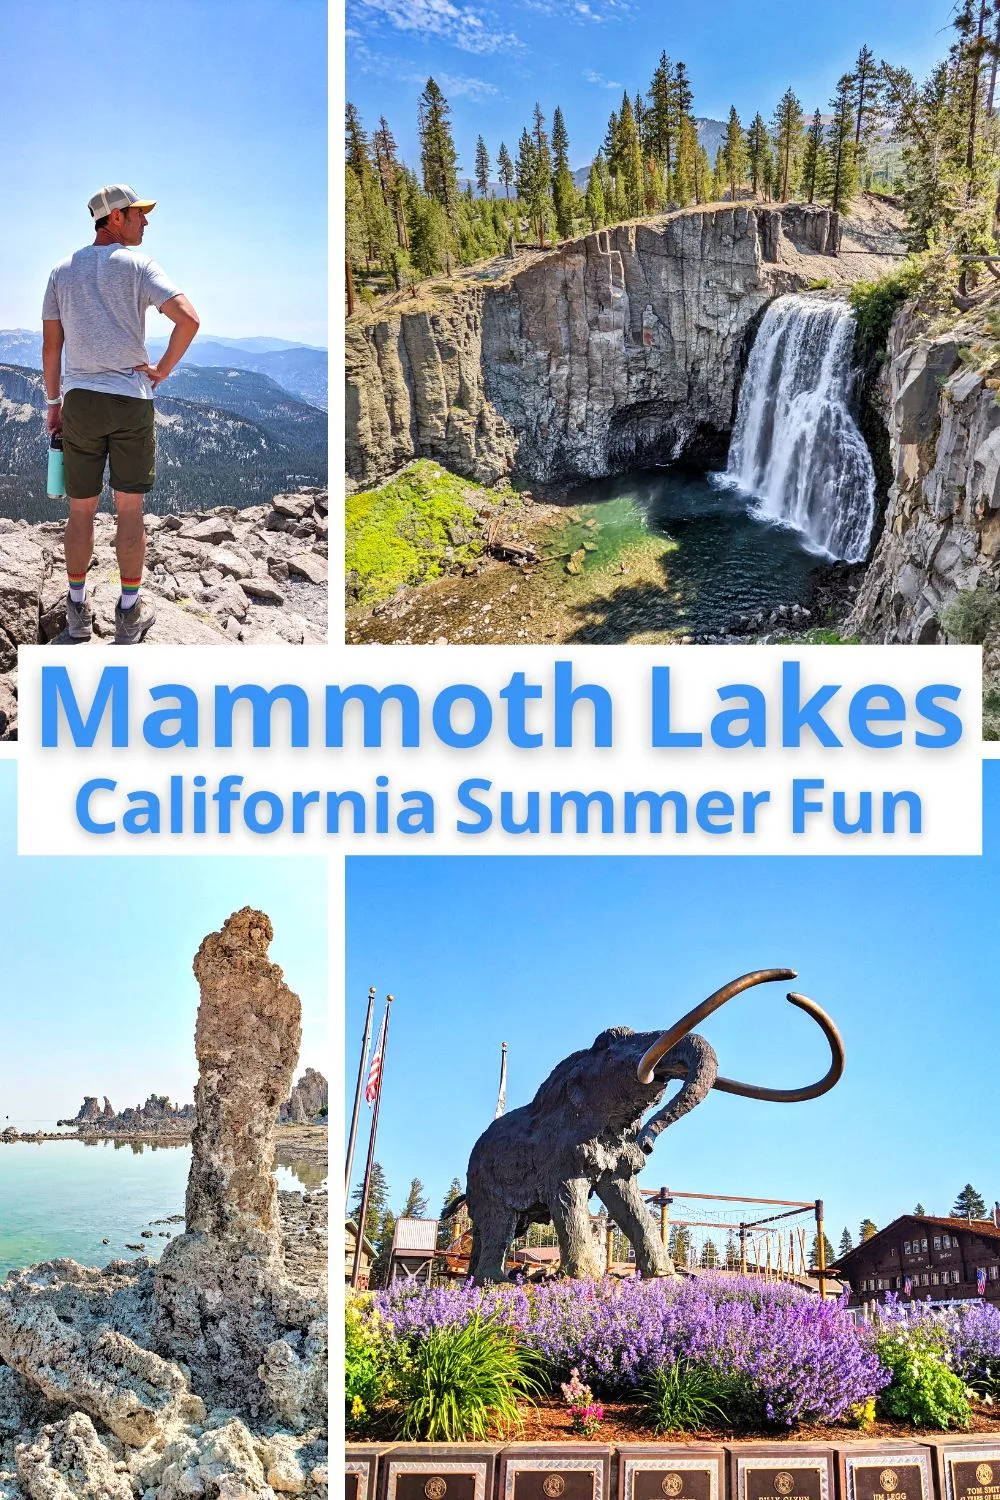 Summer in Mammoth Lakes, California is full of fun things to do. While people usually think of Mammoth as a ski destination, it's also full of summer hiking, kayaking, boating and more. See the best things to do in summertime!